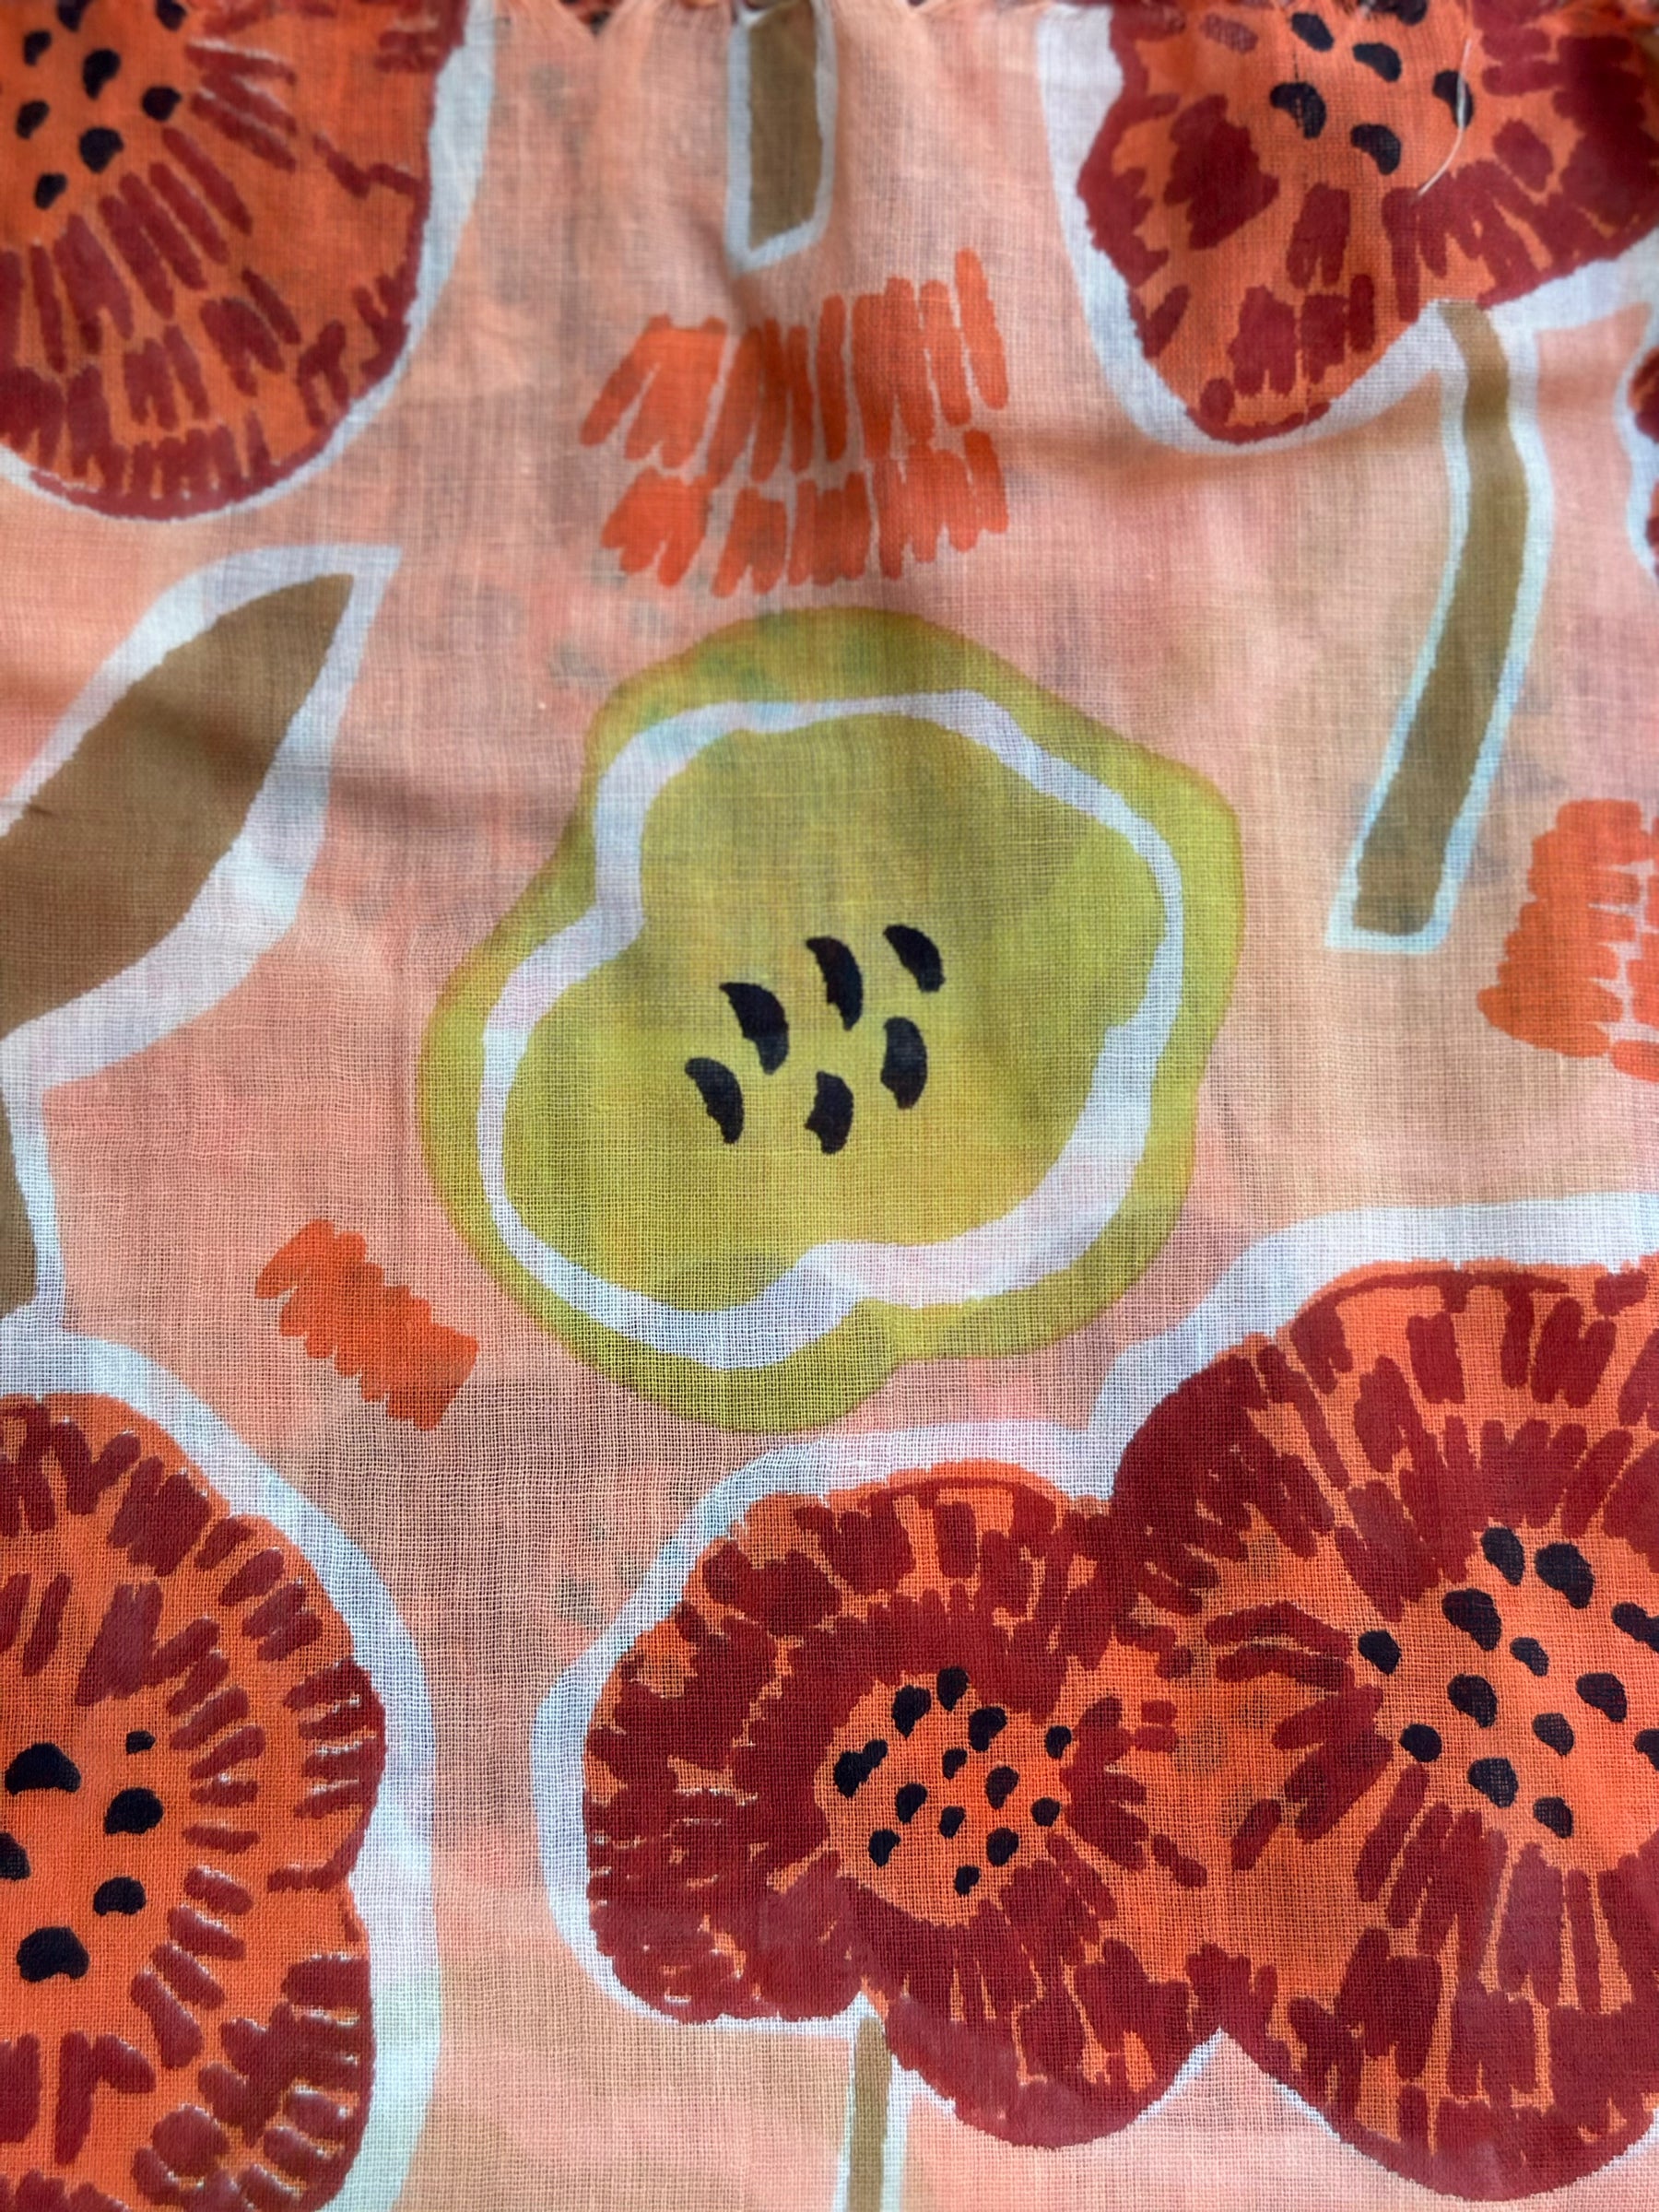 Summer Blomme Cotton Scarf - Coral